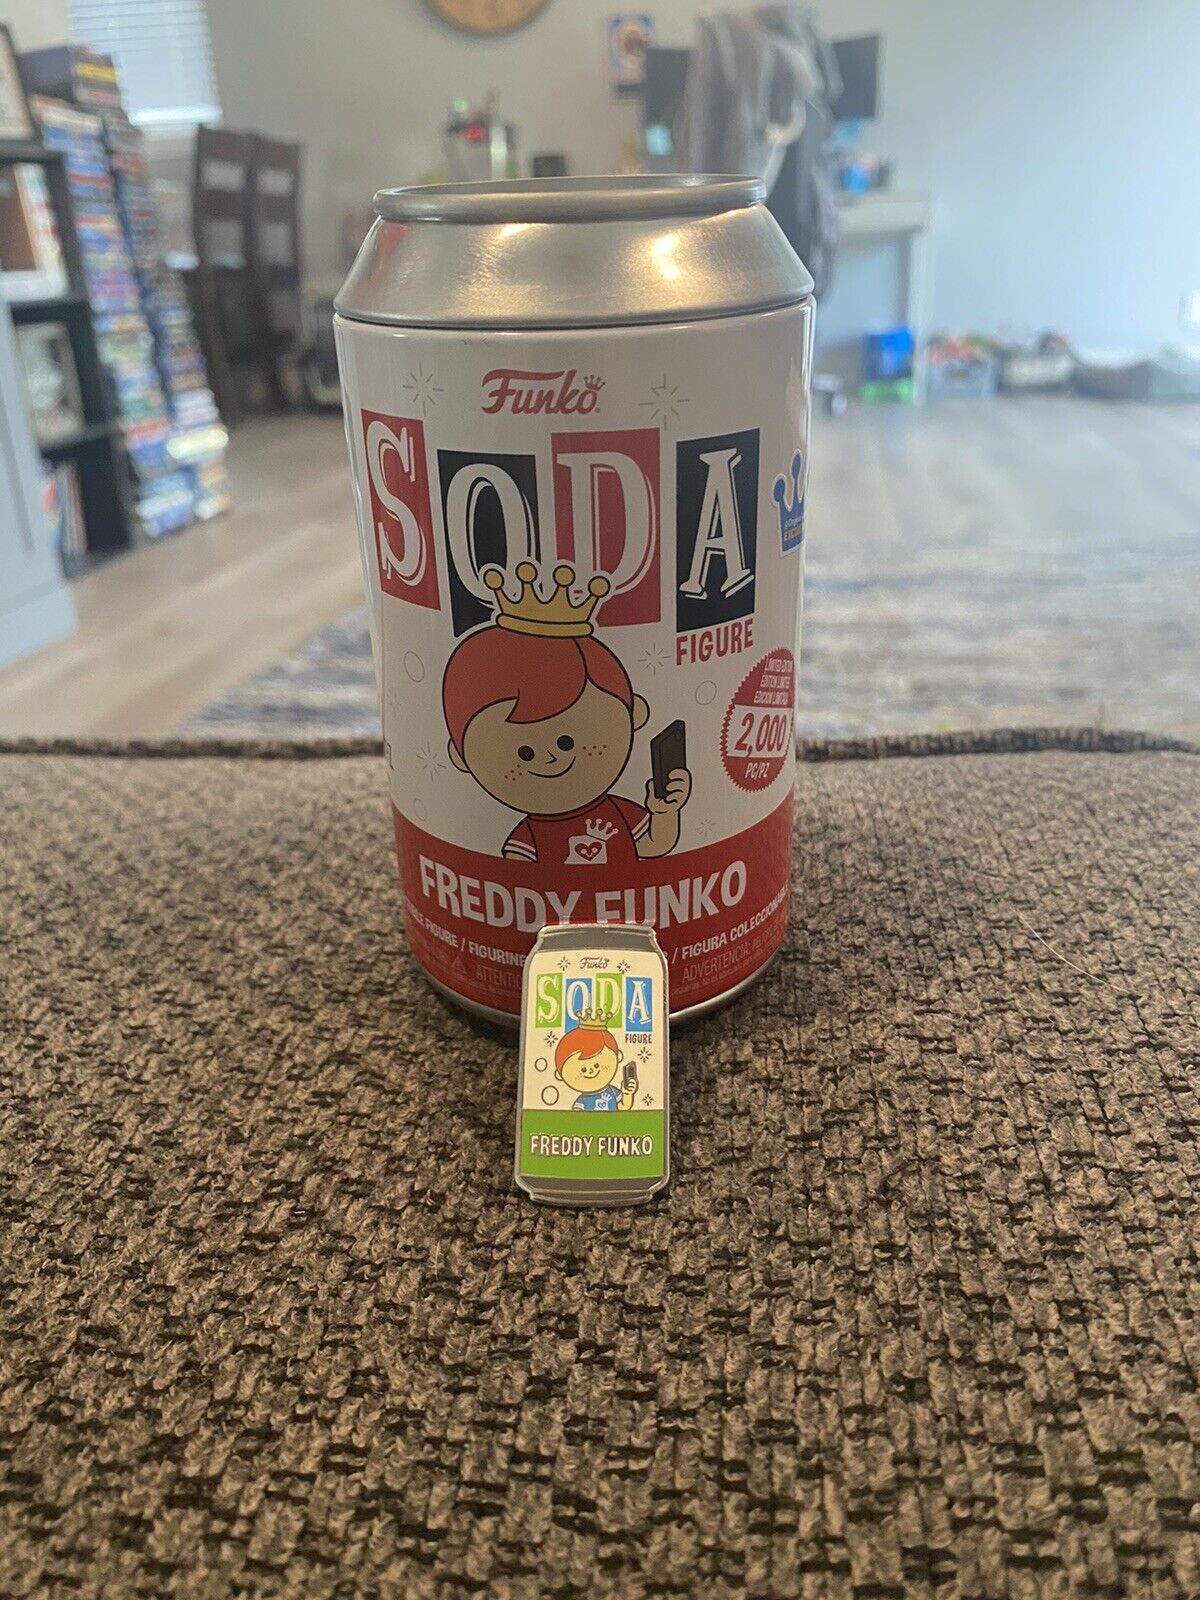 LIMITED EDITION FREDDY FUNKO SOCIAL MEDIA SODA POP WITH RARE CHASE PIN